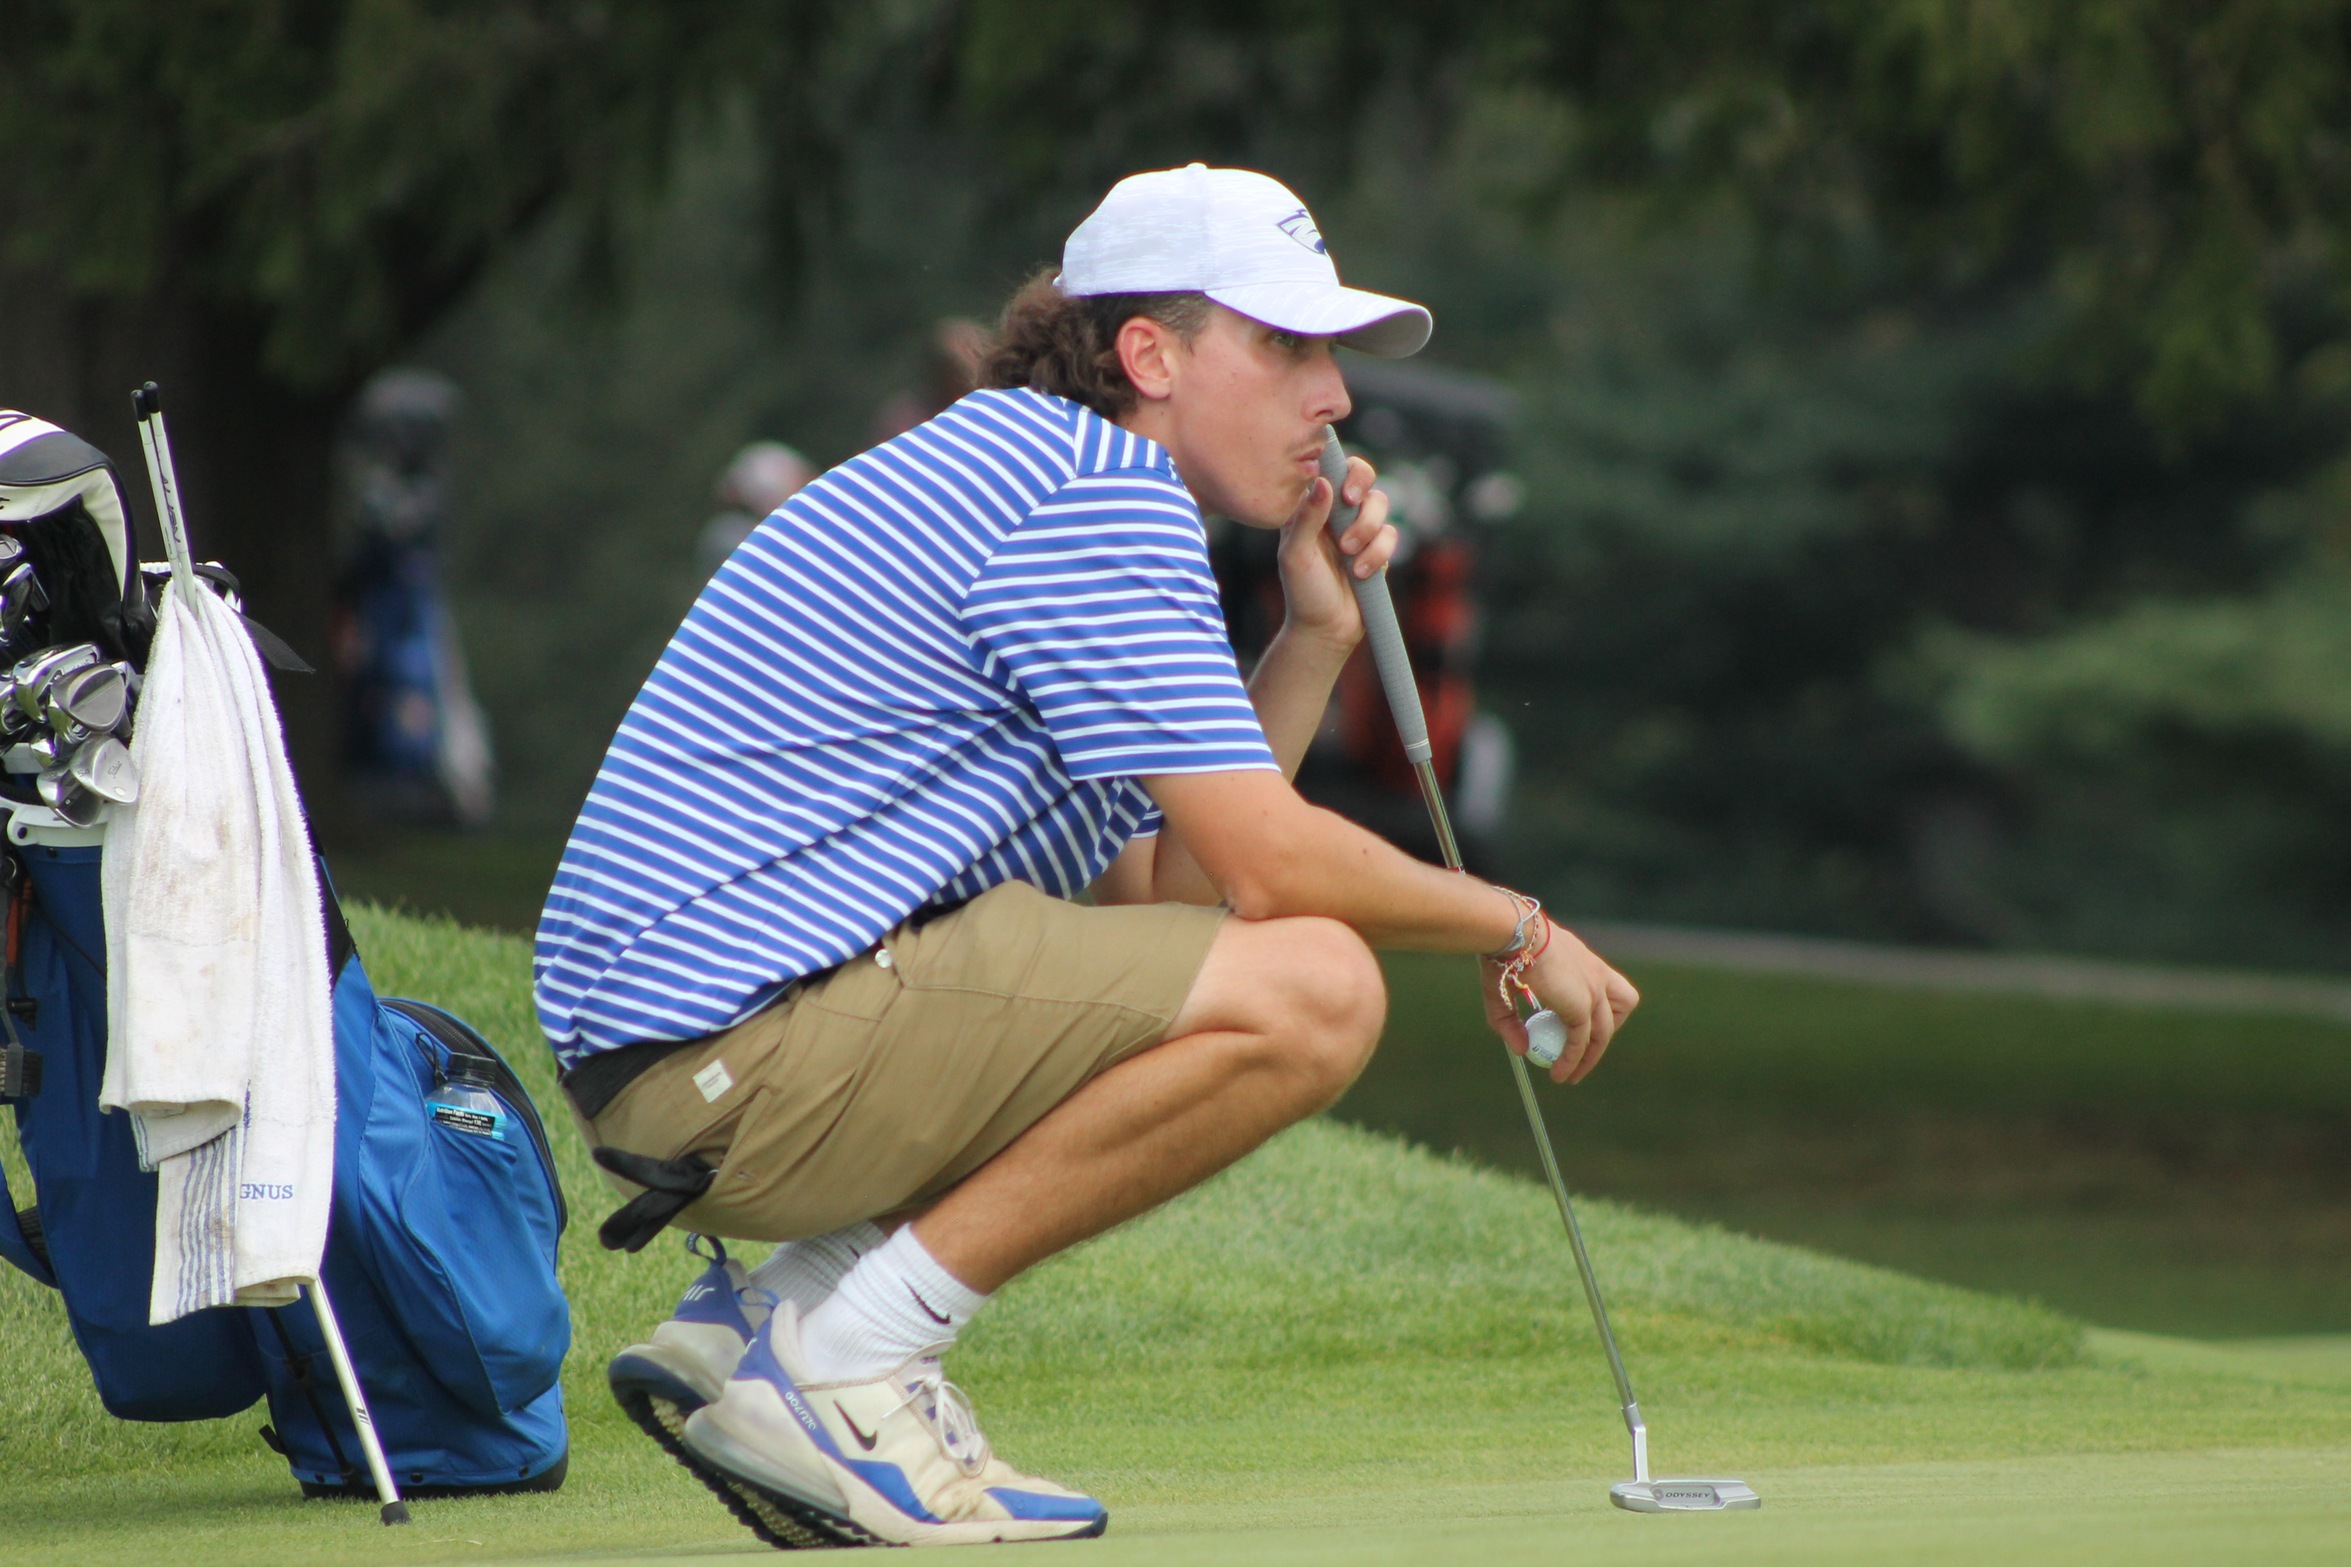 Men's Golf In 15th Place After First Round oF Detrick Invitational